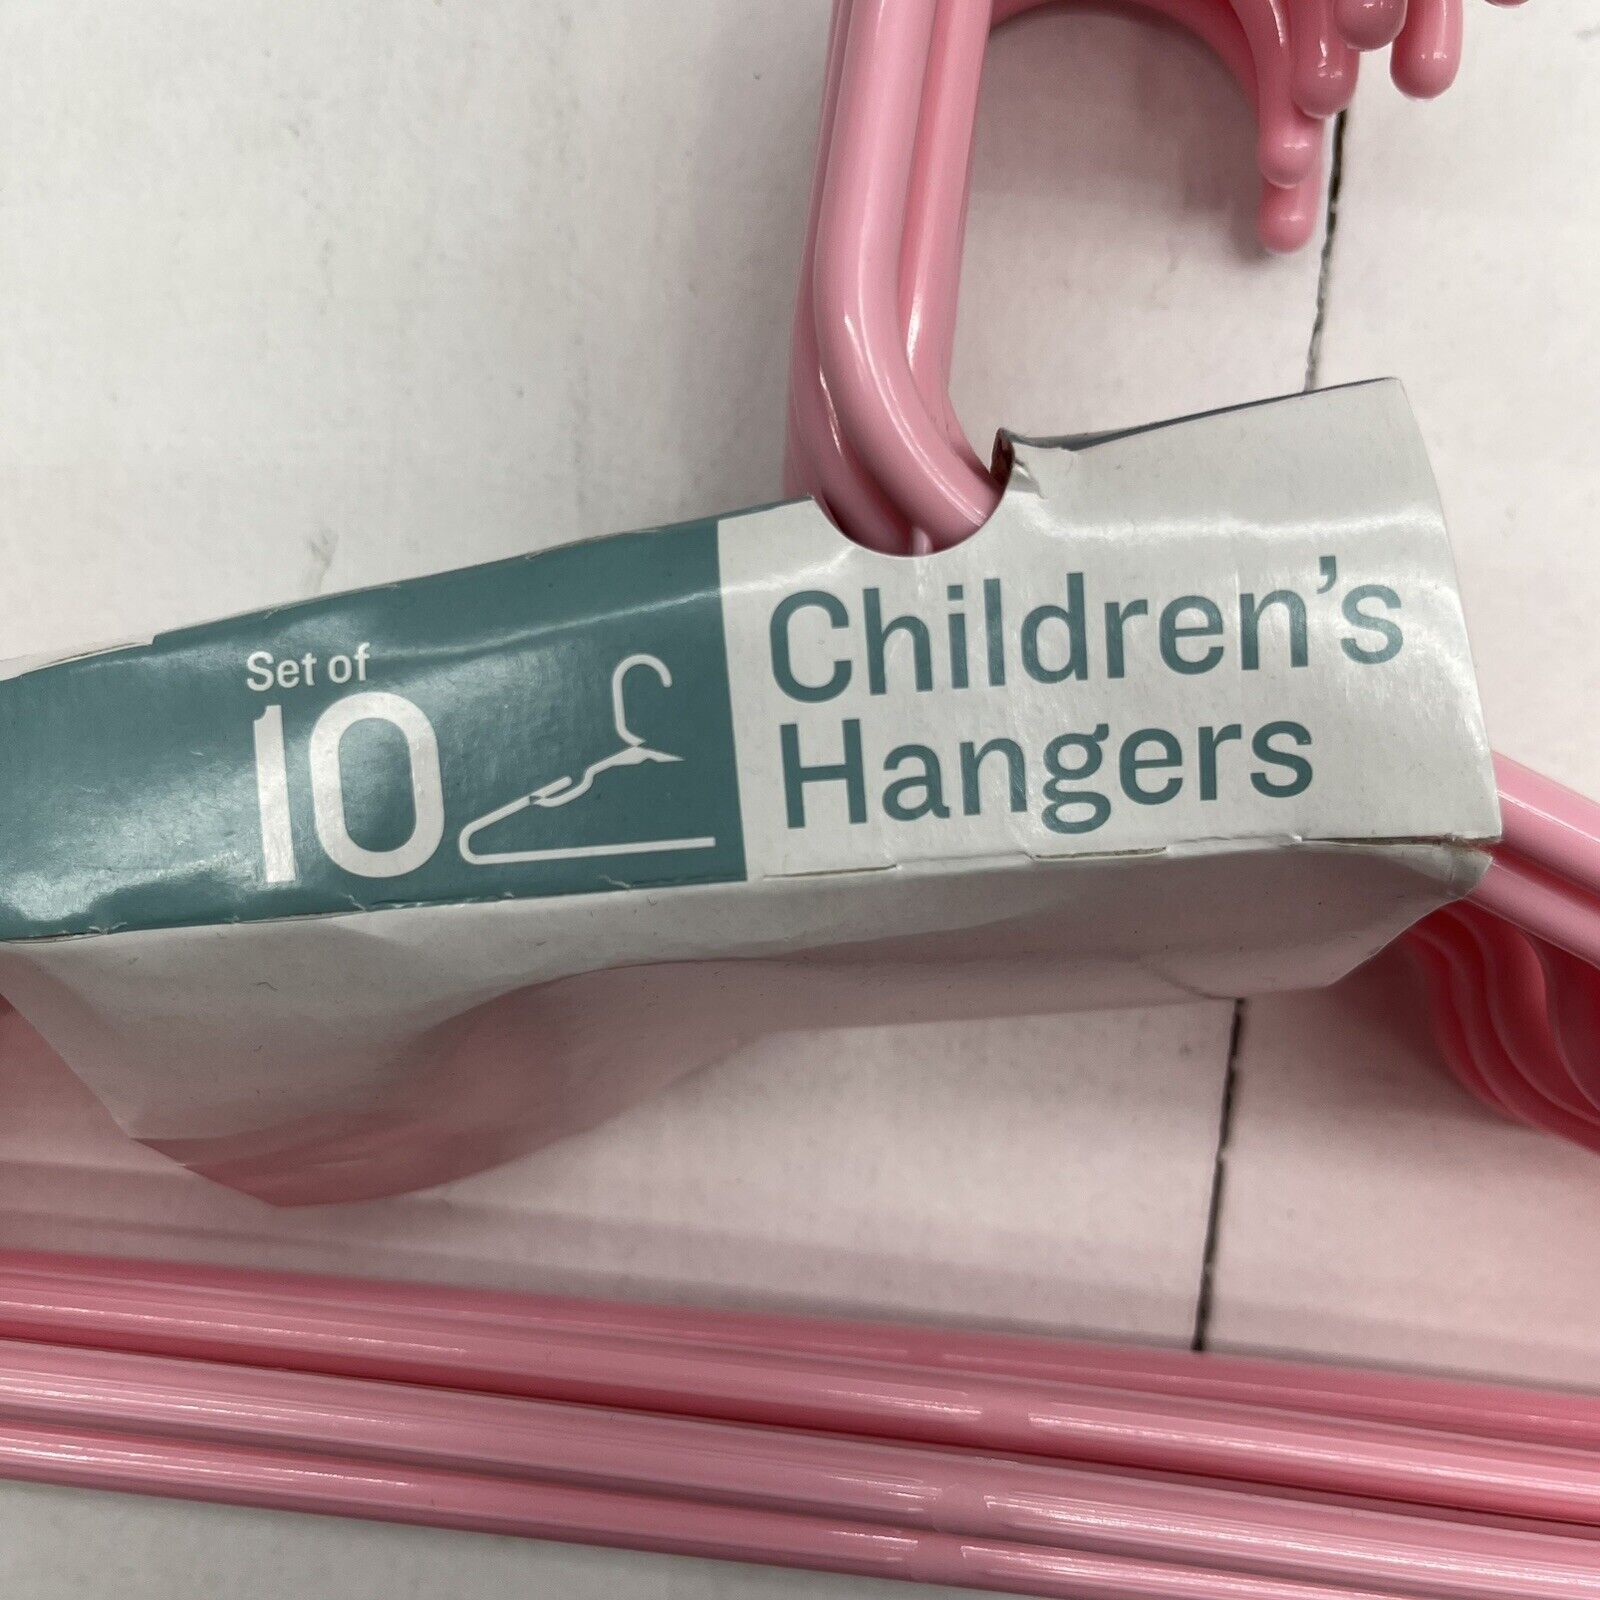 China Hot Sale Pink Glitter Plastic Clothes Hangers for Kids Babies Children  Manufacture and Factory